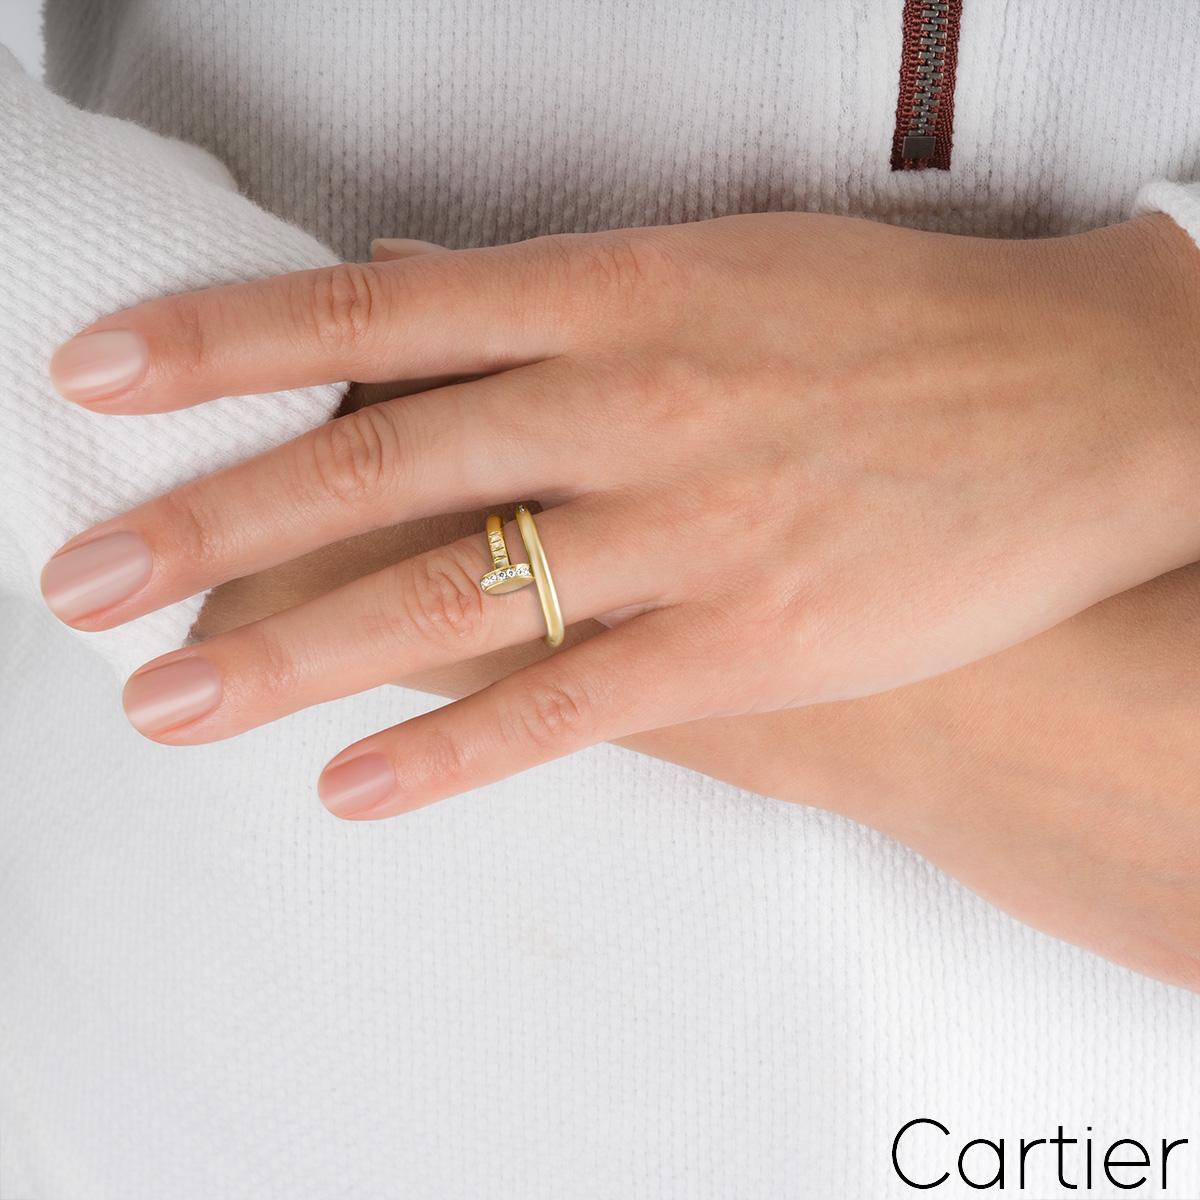 Cartier Yellow Gold Diamond Juste Un Clou Ring Size 48 B4216900 For Sale 2